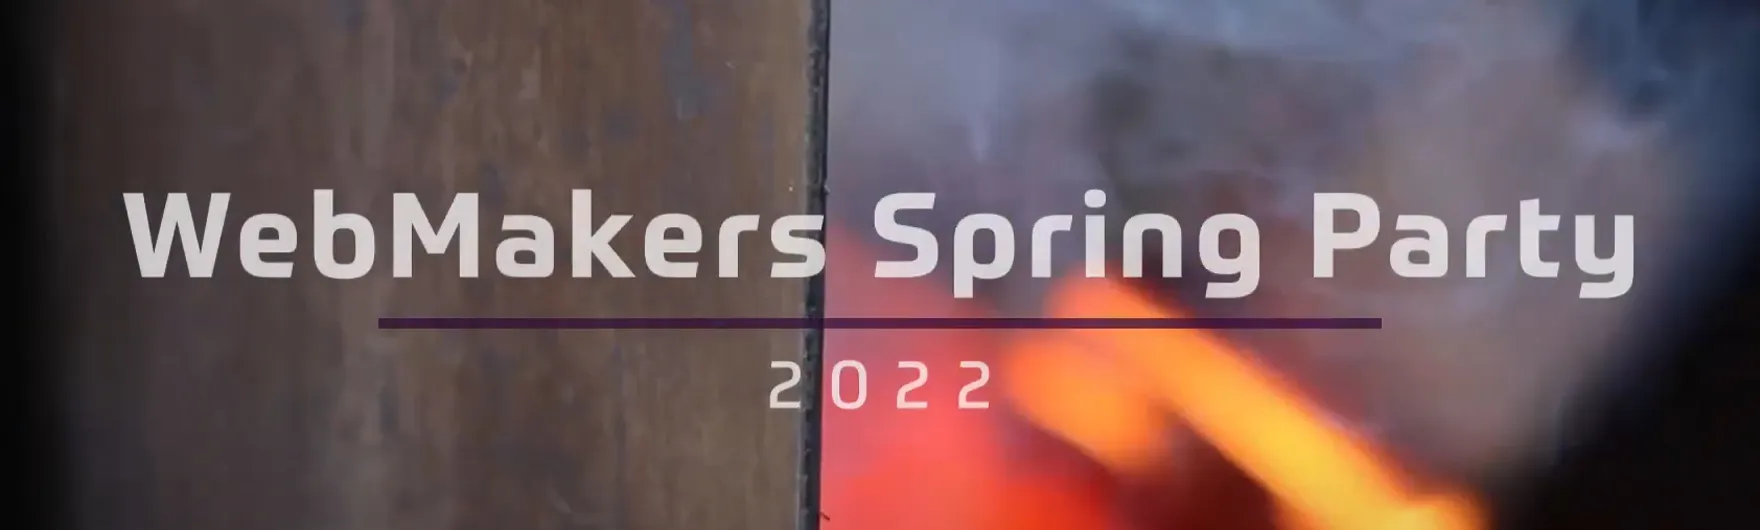 WebMakers Spring Party 2022